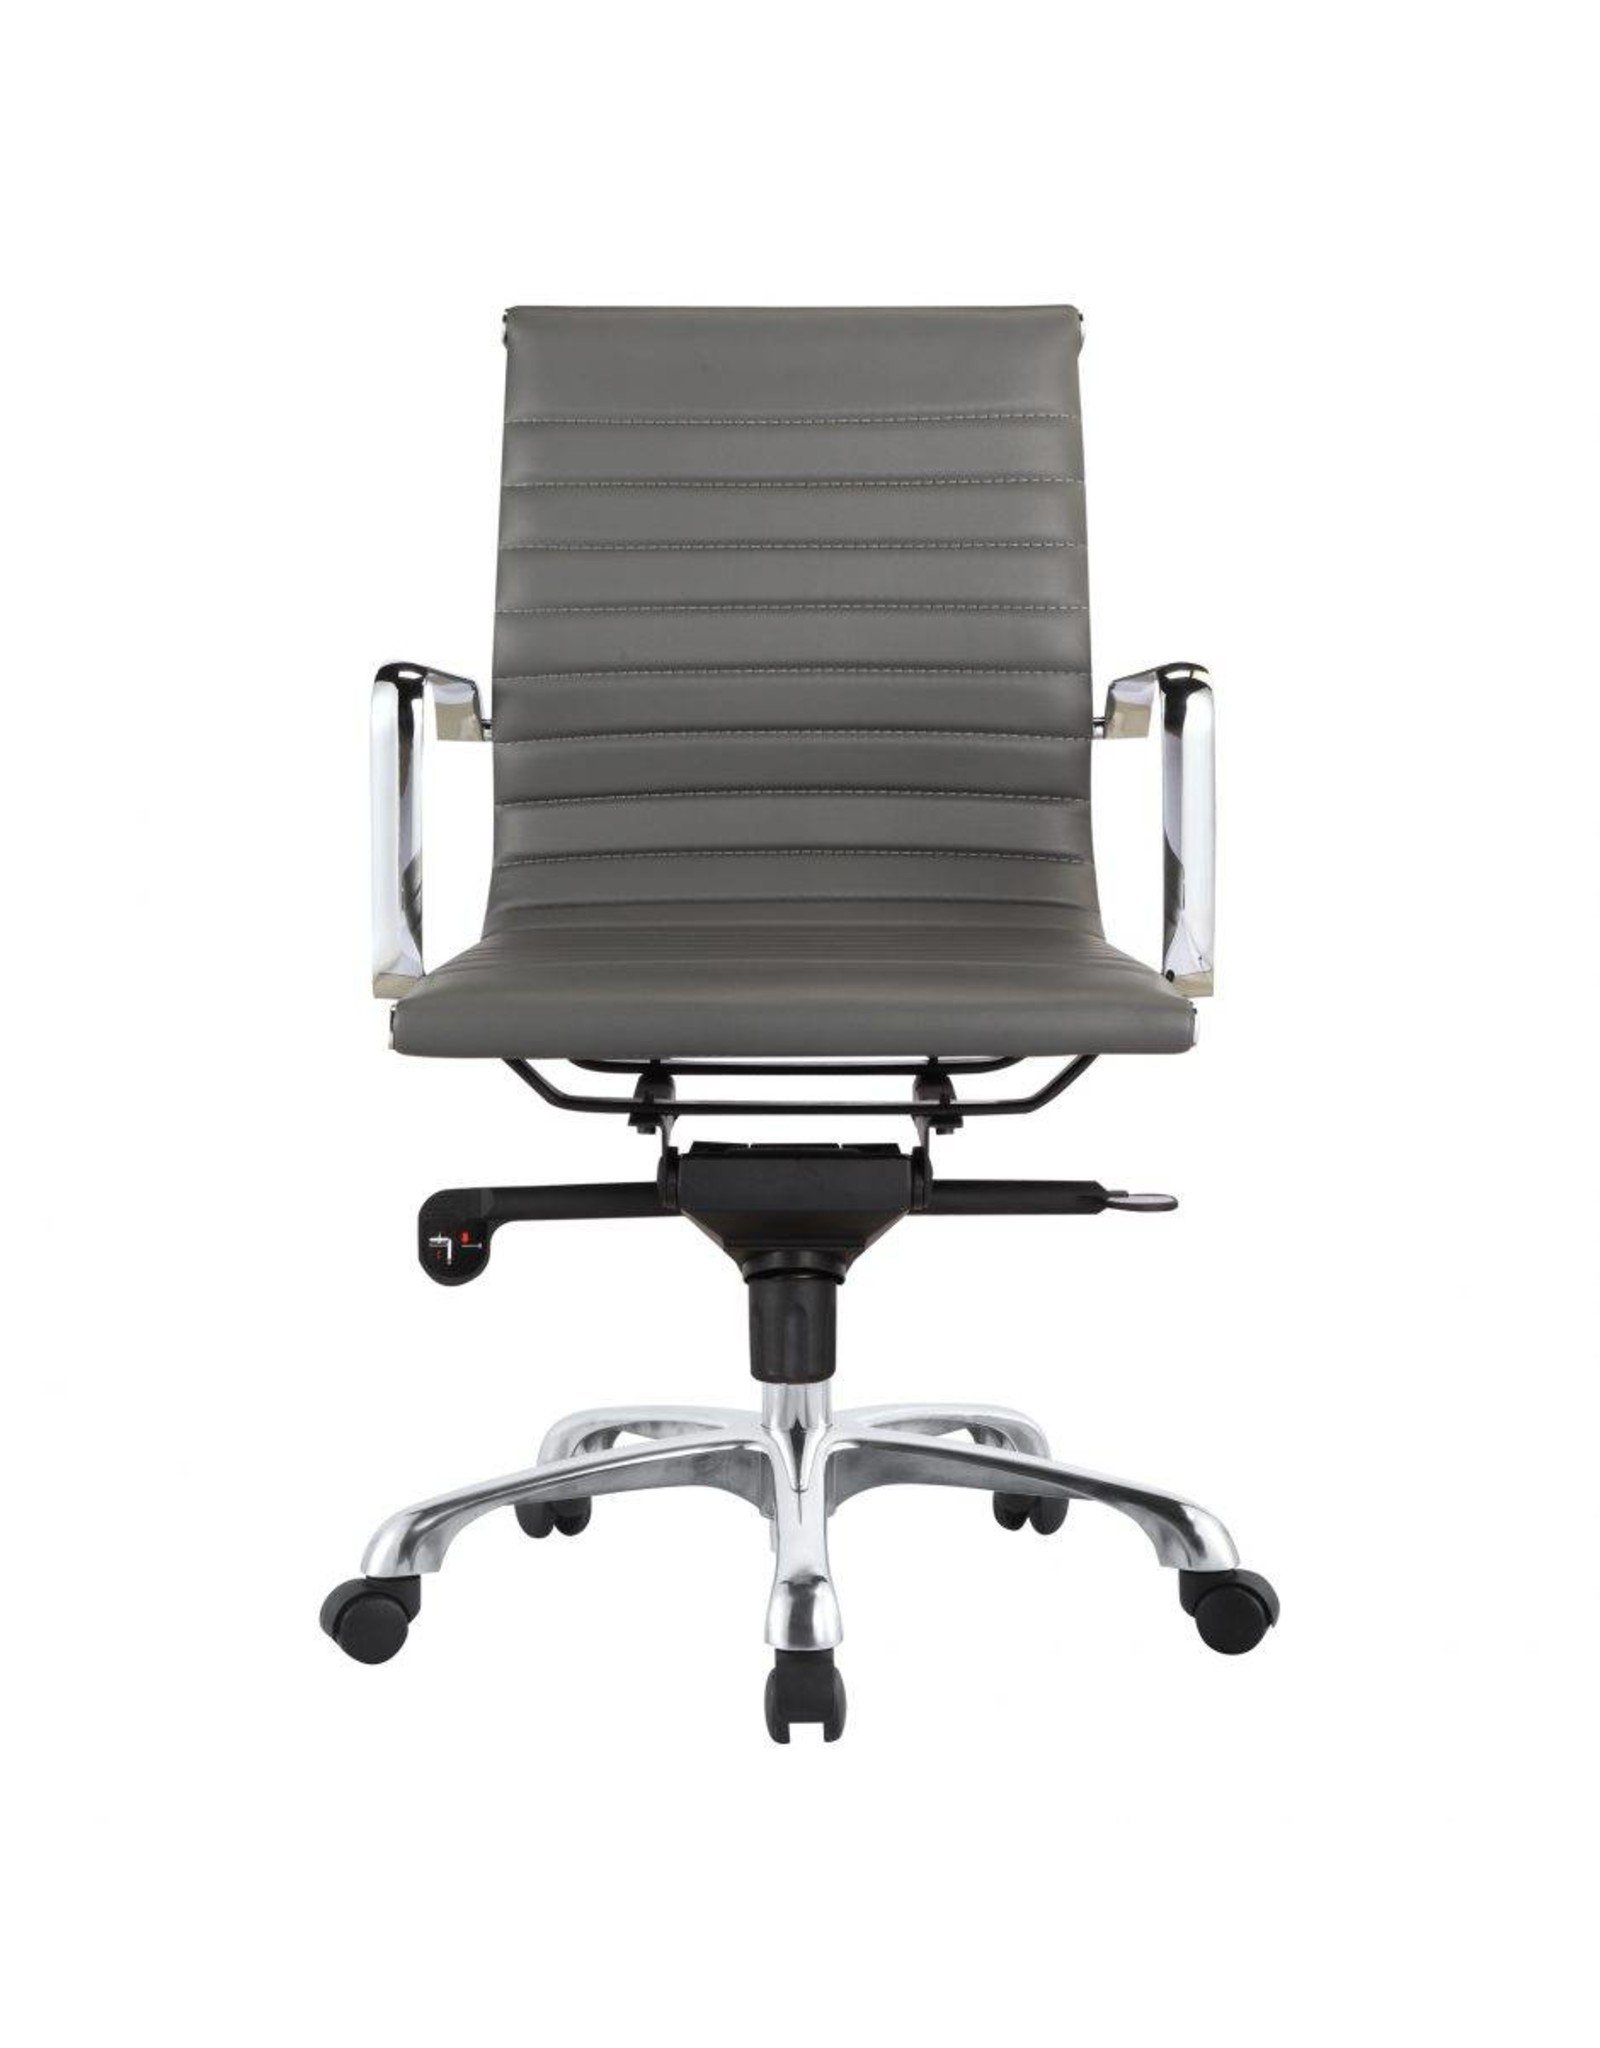 Monroe & Kent OMEGA OFFICE CHAIR LOW BACK GREY